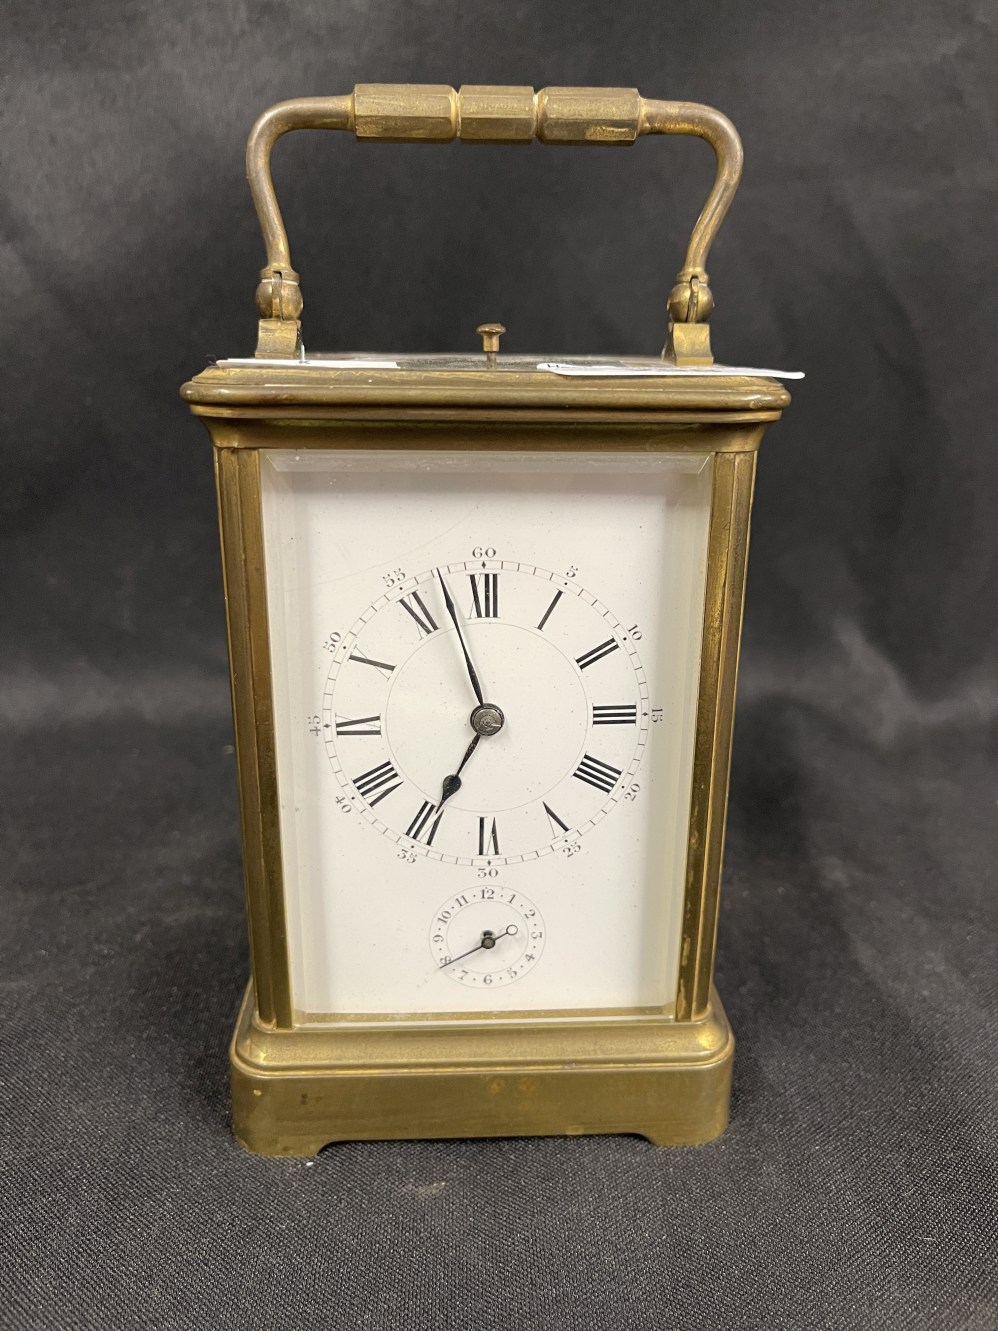 Clocks: 19th cent. French carriage alarm, repeater, striking on the half hours. White enamel dial